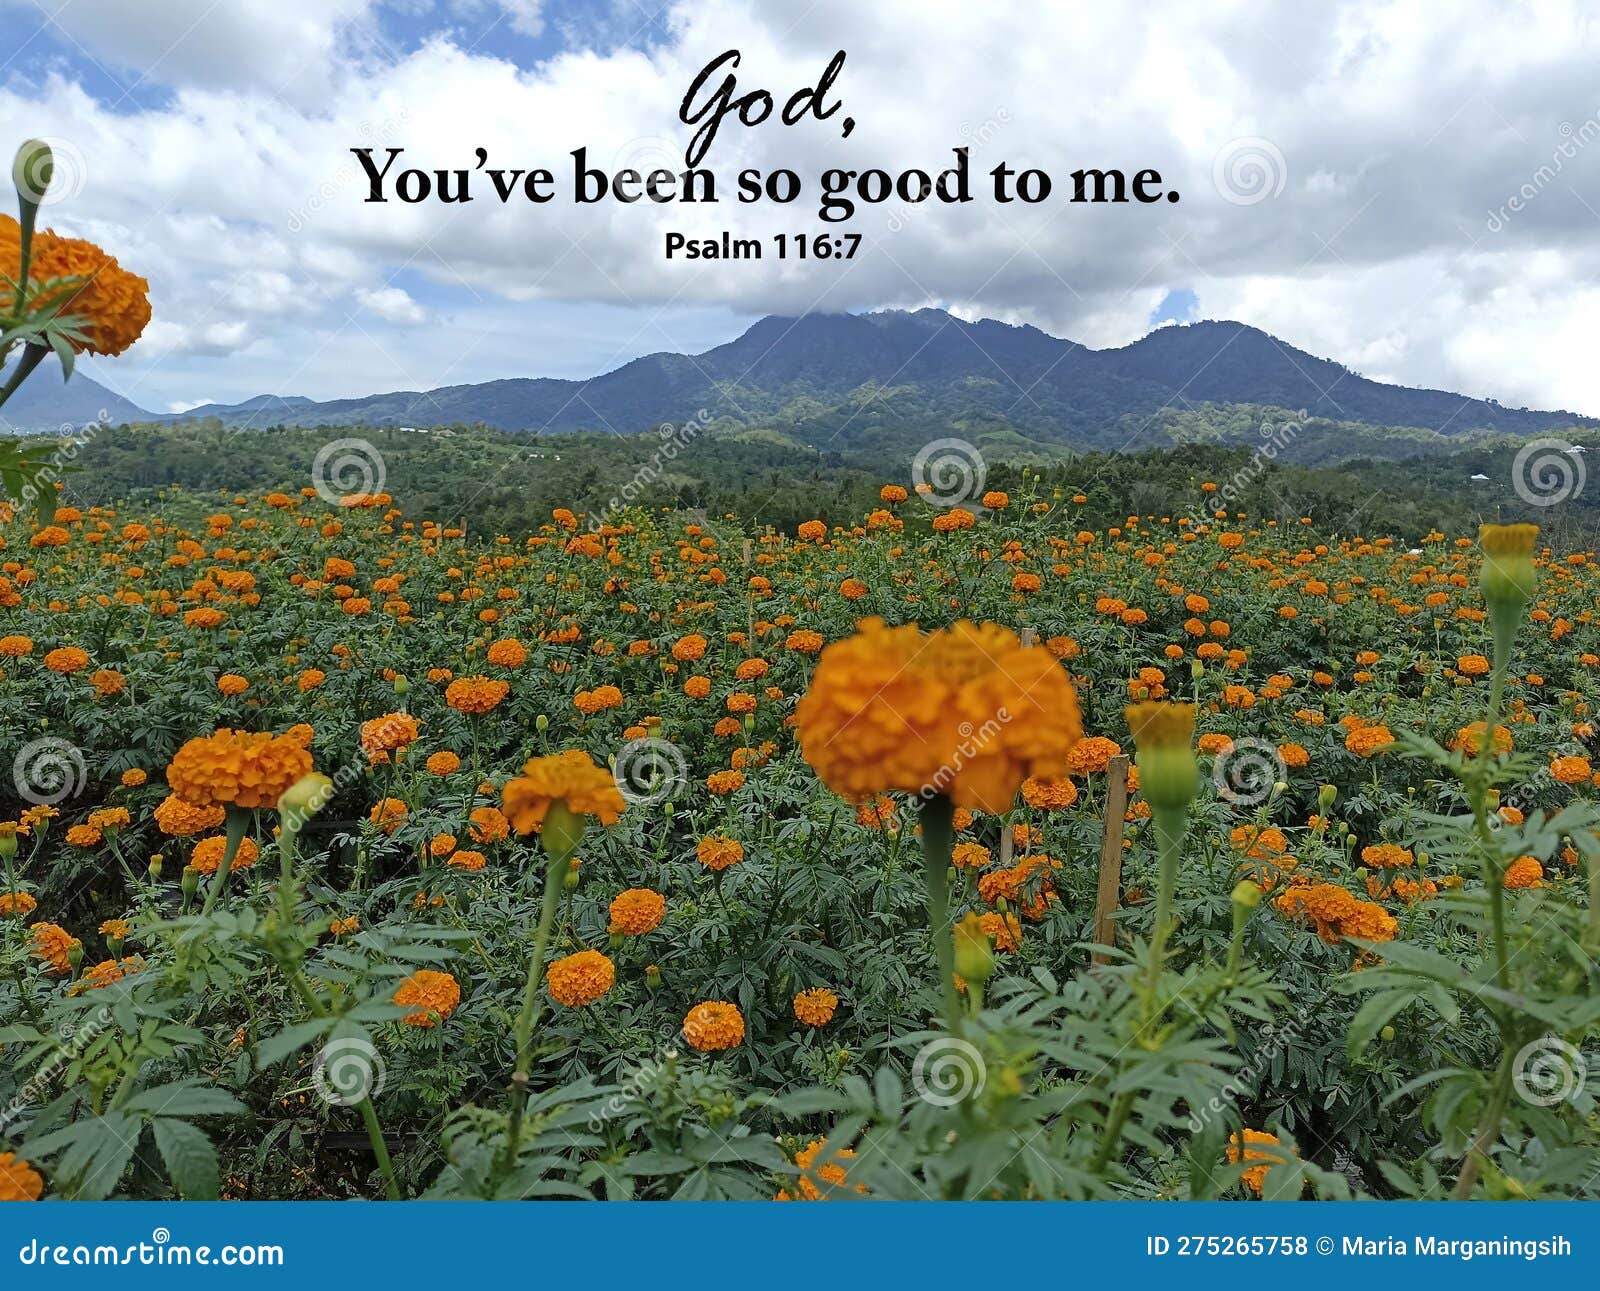 bible verse quote - god, you have been so good to me. psalm 116:7. with orange marigold flowers garden and mountain view